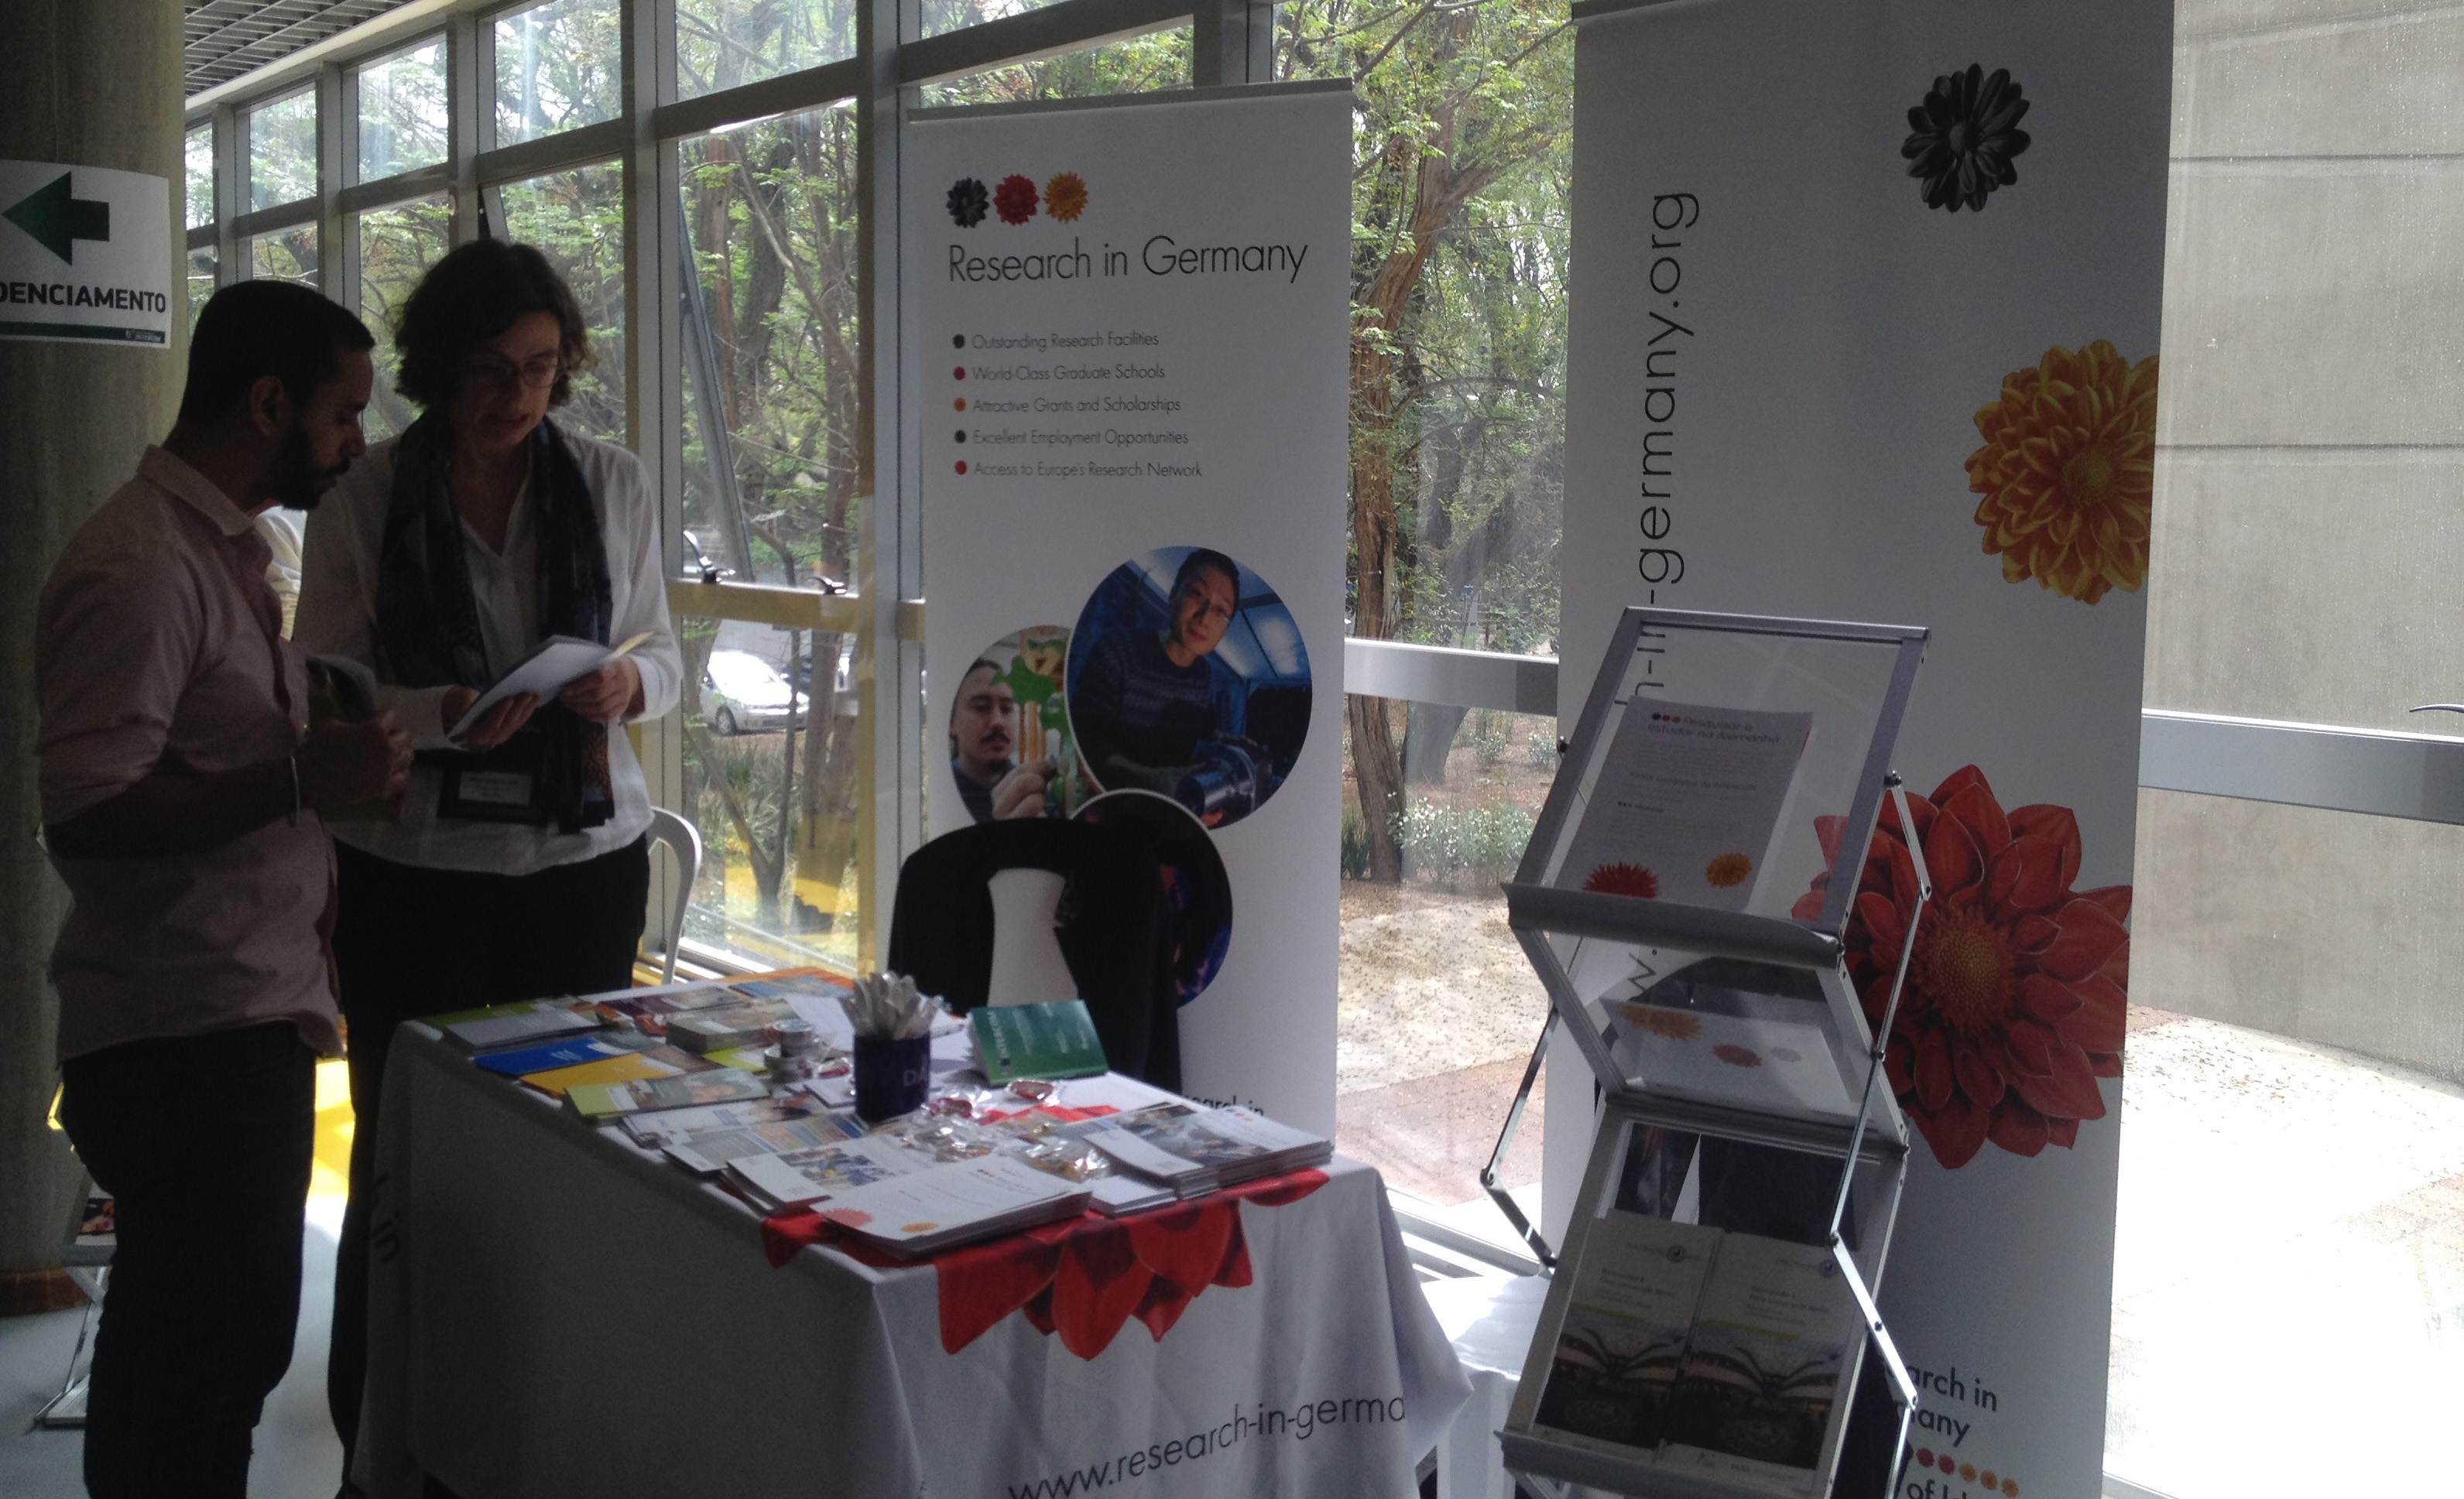 Anna Barkhausen (DAAD) in consultation at the Research in Germany information table